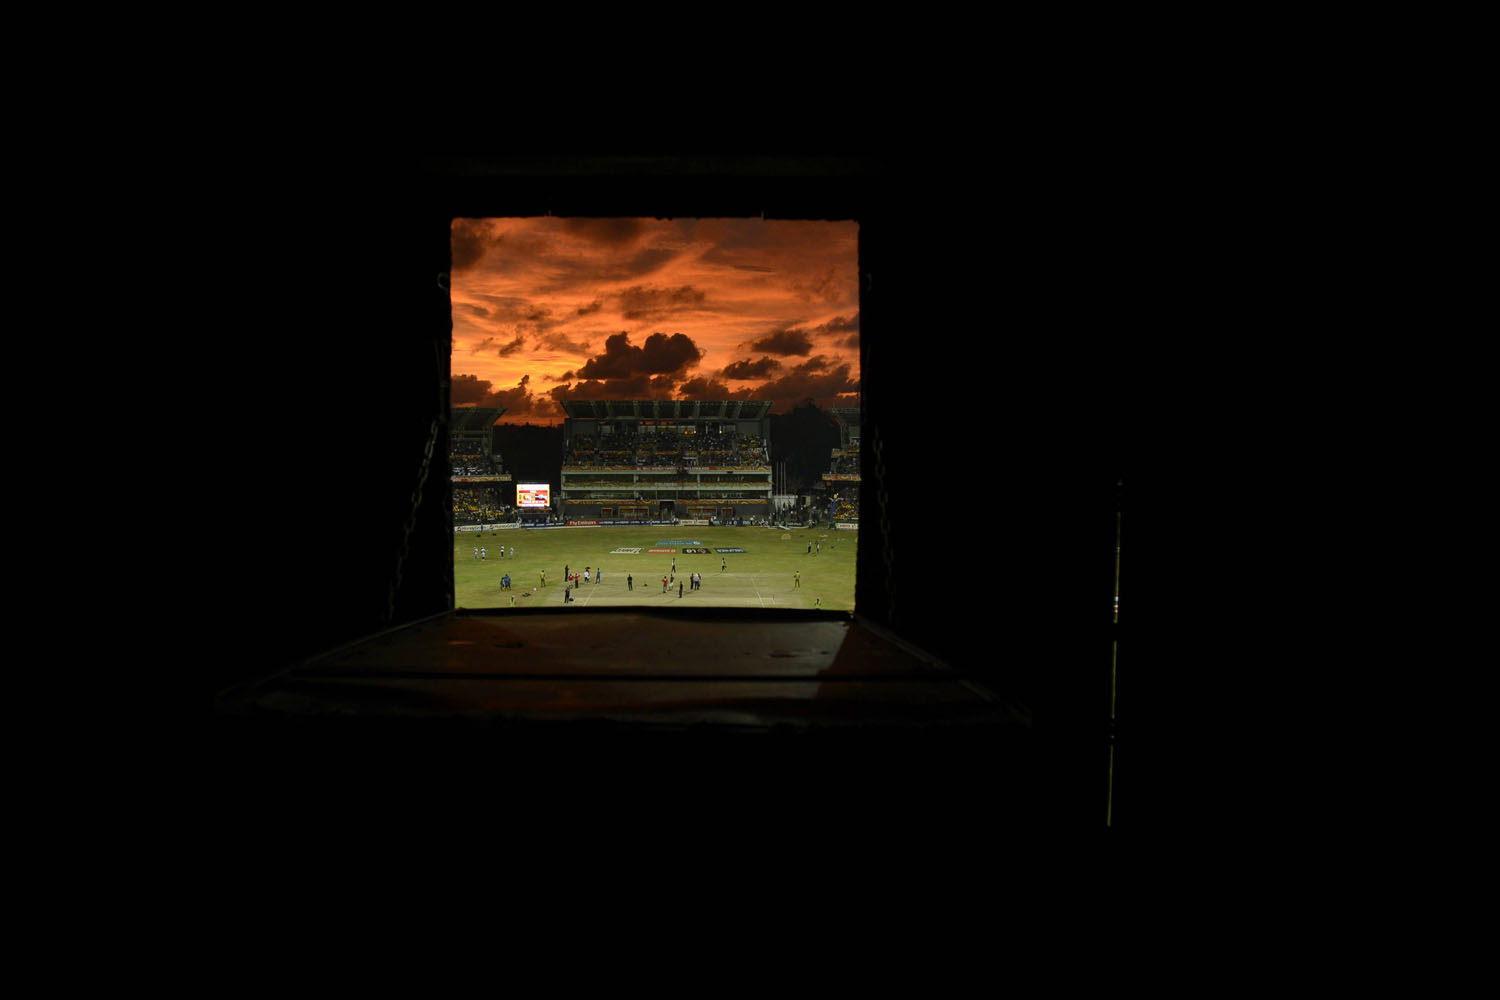 Oct. 7, 2012. A view of the R Premadasa stadium at sunset through a hole in the scoreboard before the world Twenty20 final between Sri Lanka and the West Indies at R Premadasa Stadium, Colombo, Sri Lanka.